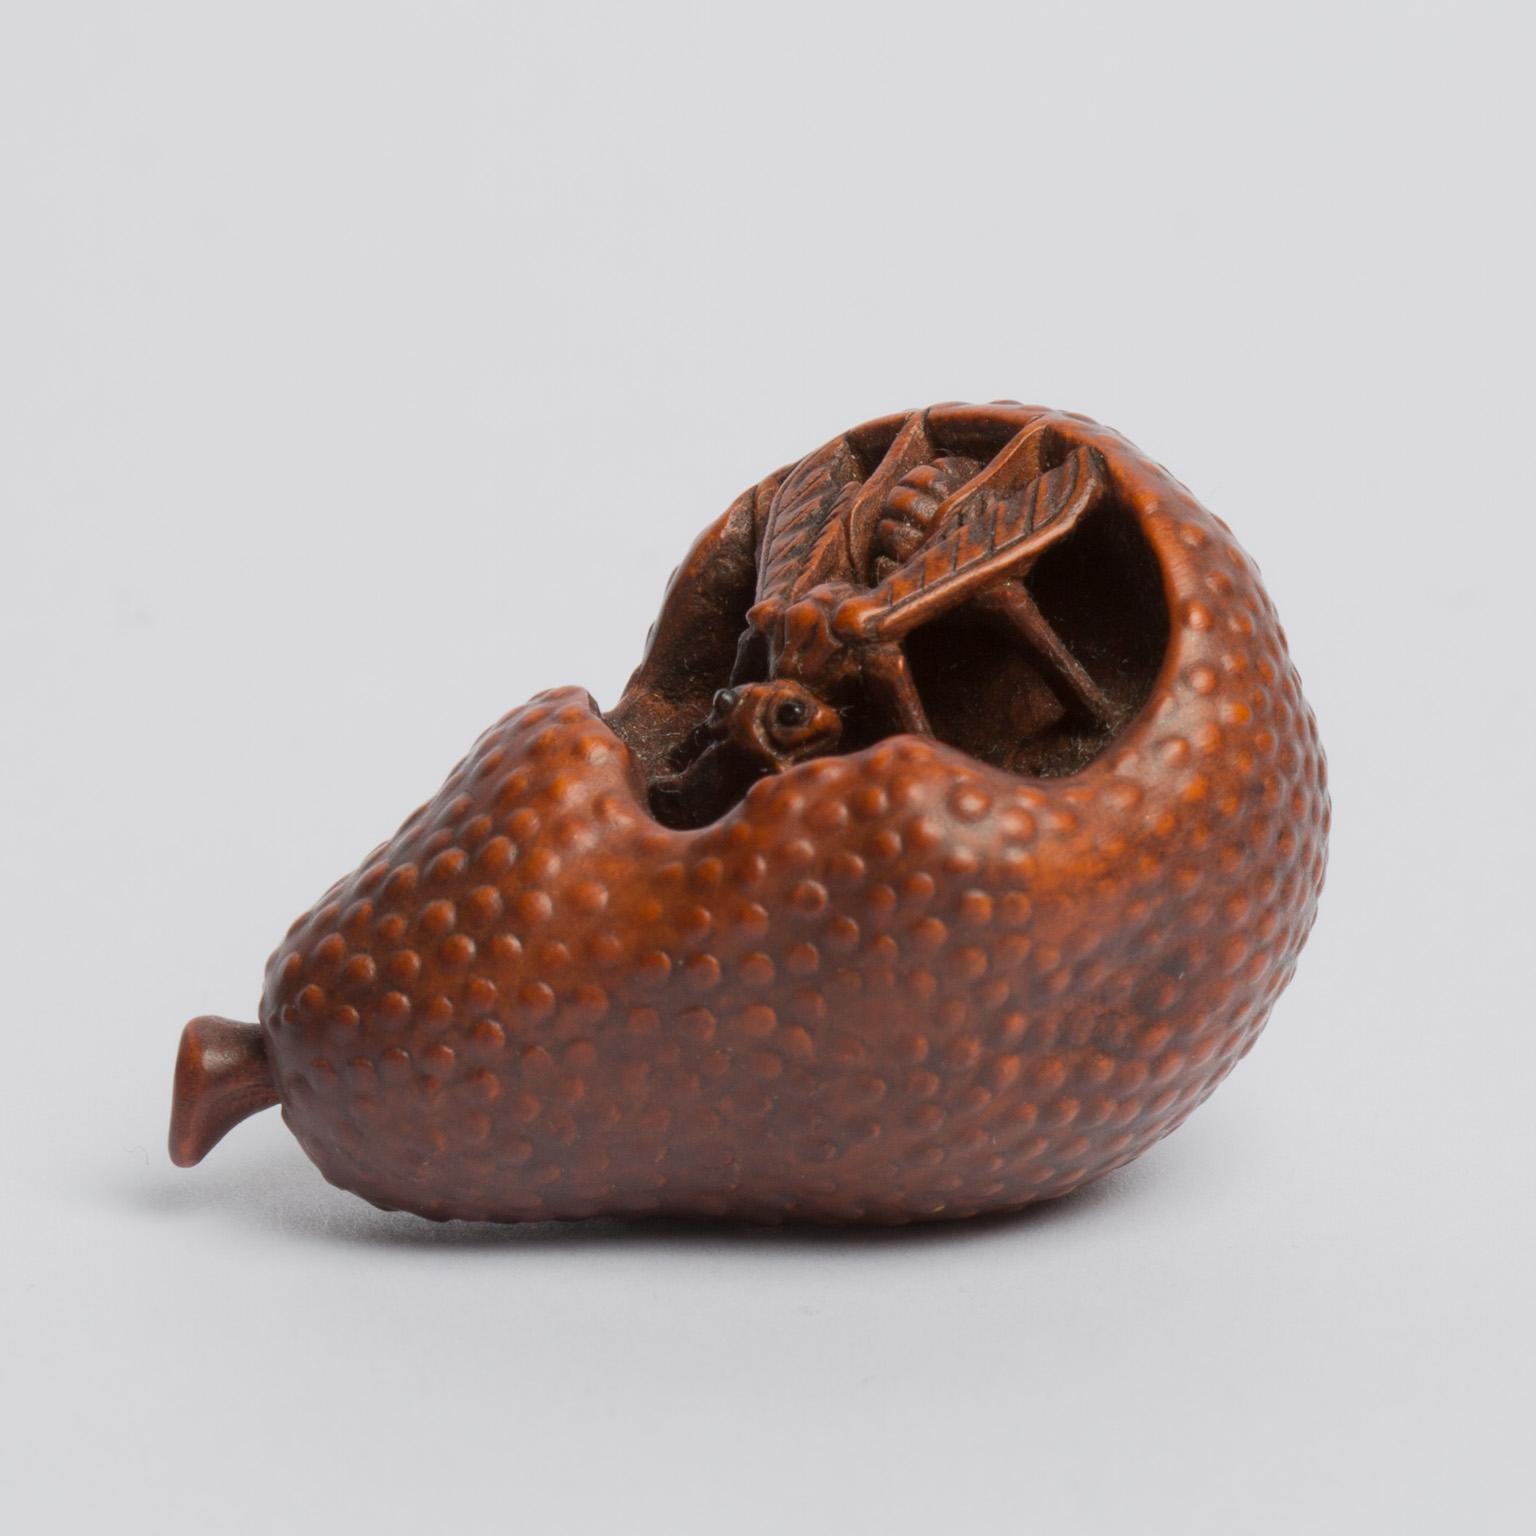 A fine wood netsuke of a wasp feeding on the rotting flesh of a pear, the rough texture of the skin of the fruit rendered with little pimples in ukibori. The netuske is unsigned, but can be attributed confidently to Kogetsu. Kogetsu is the most